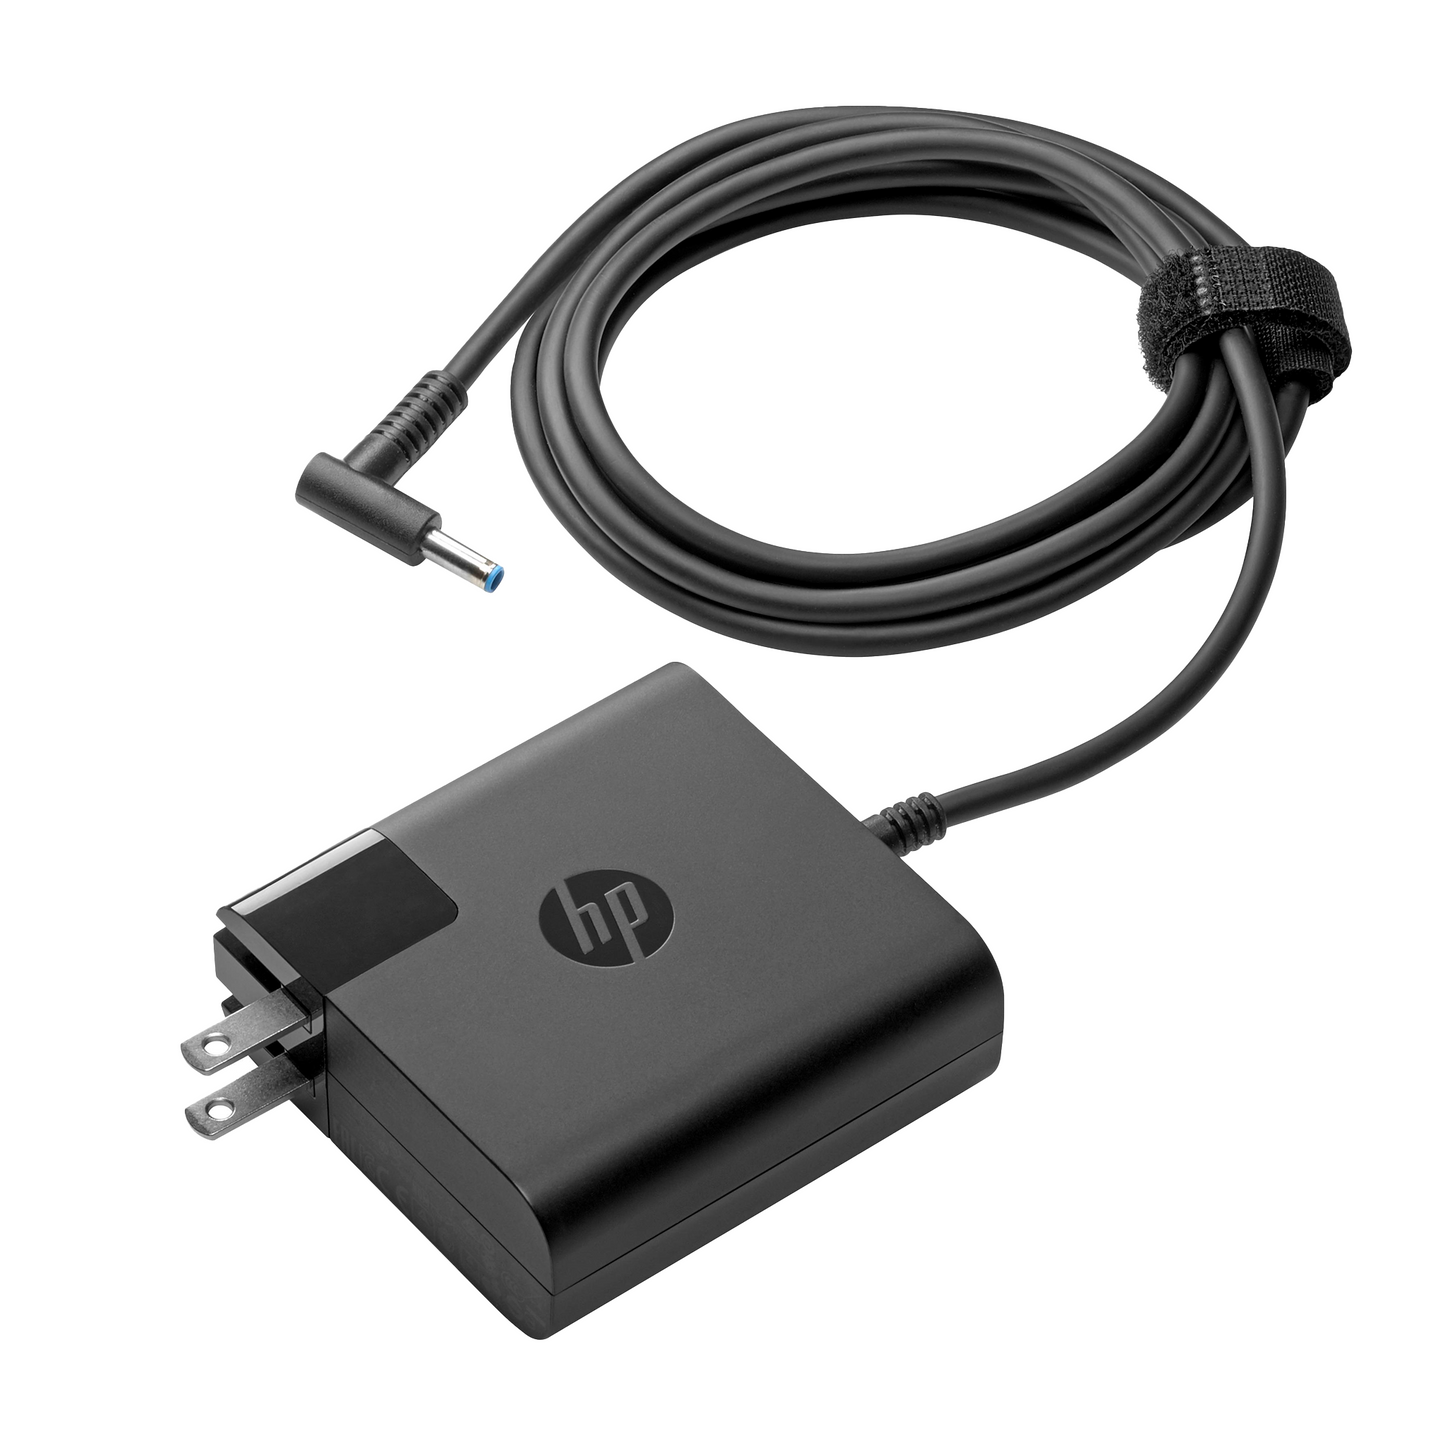 HP Elite Laptop Charging Cable